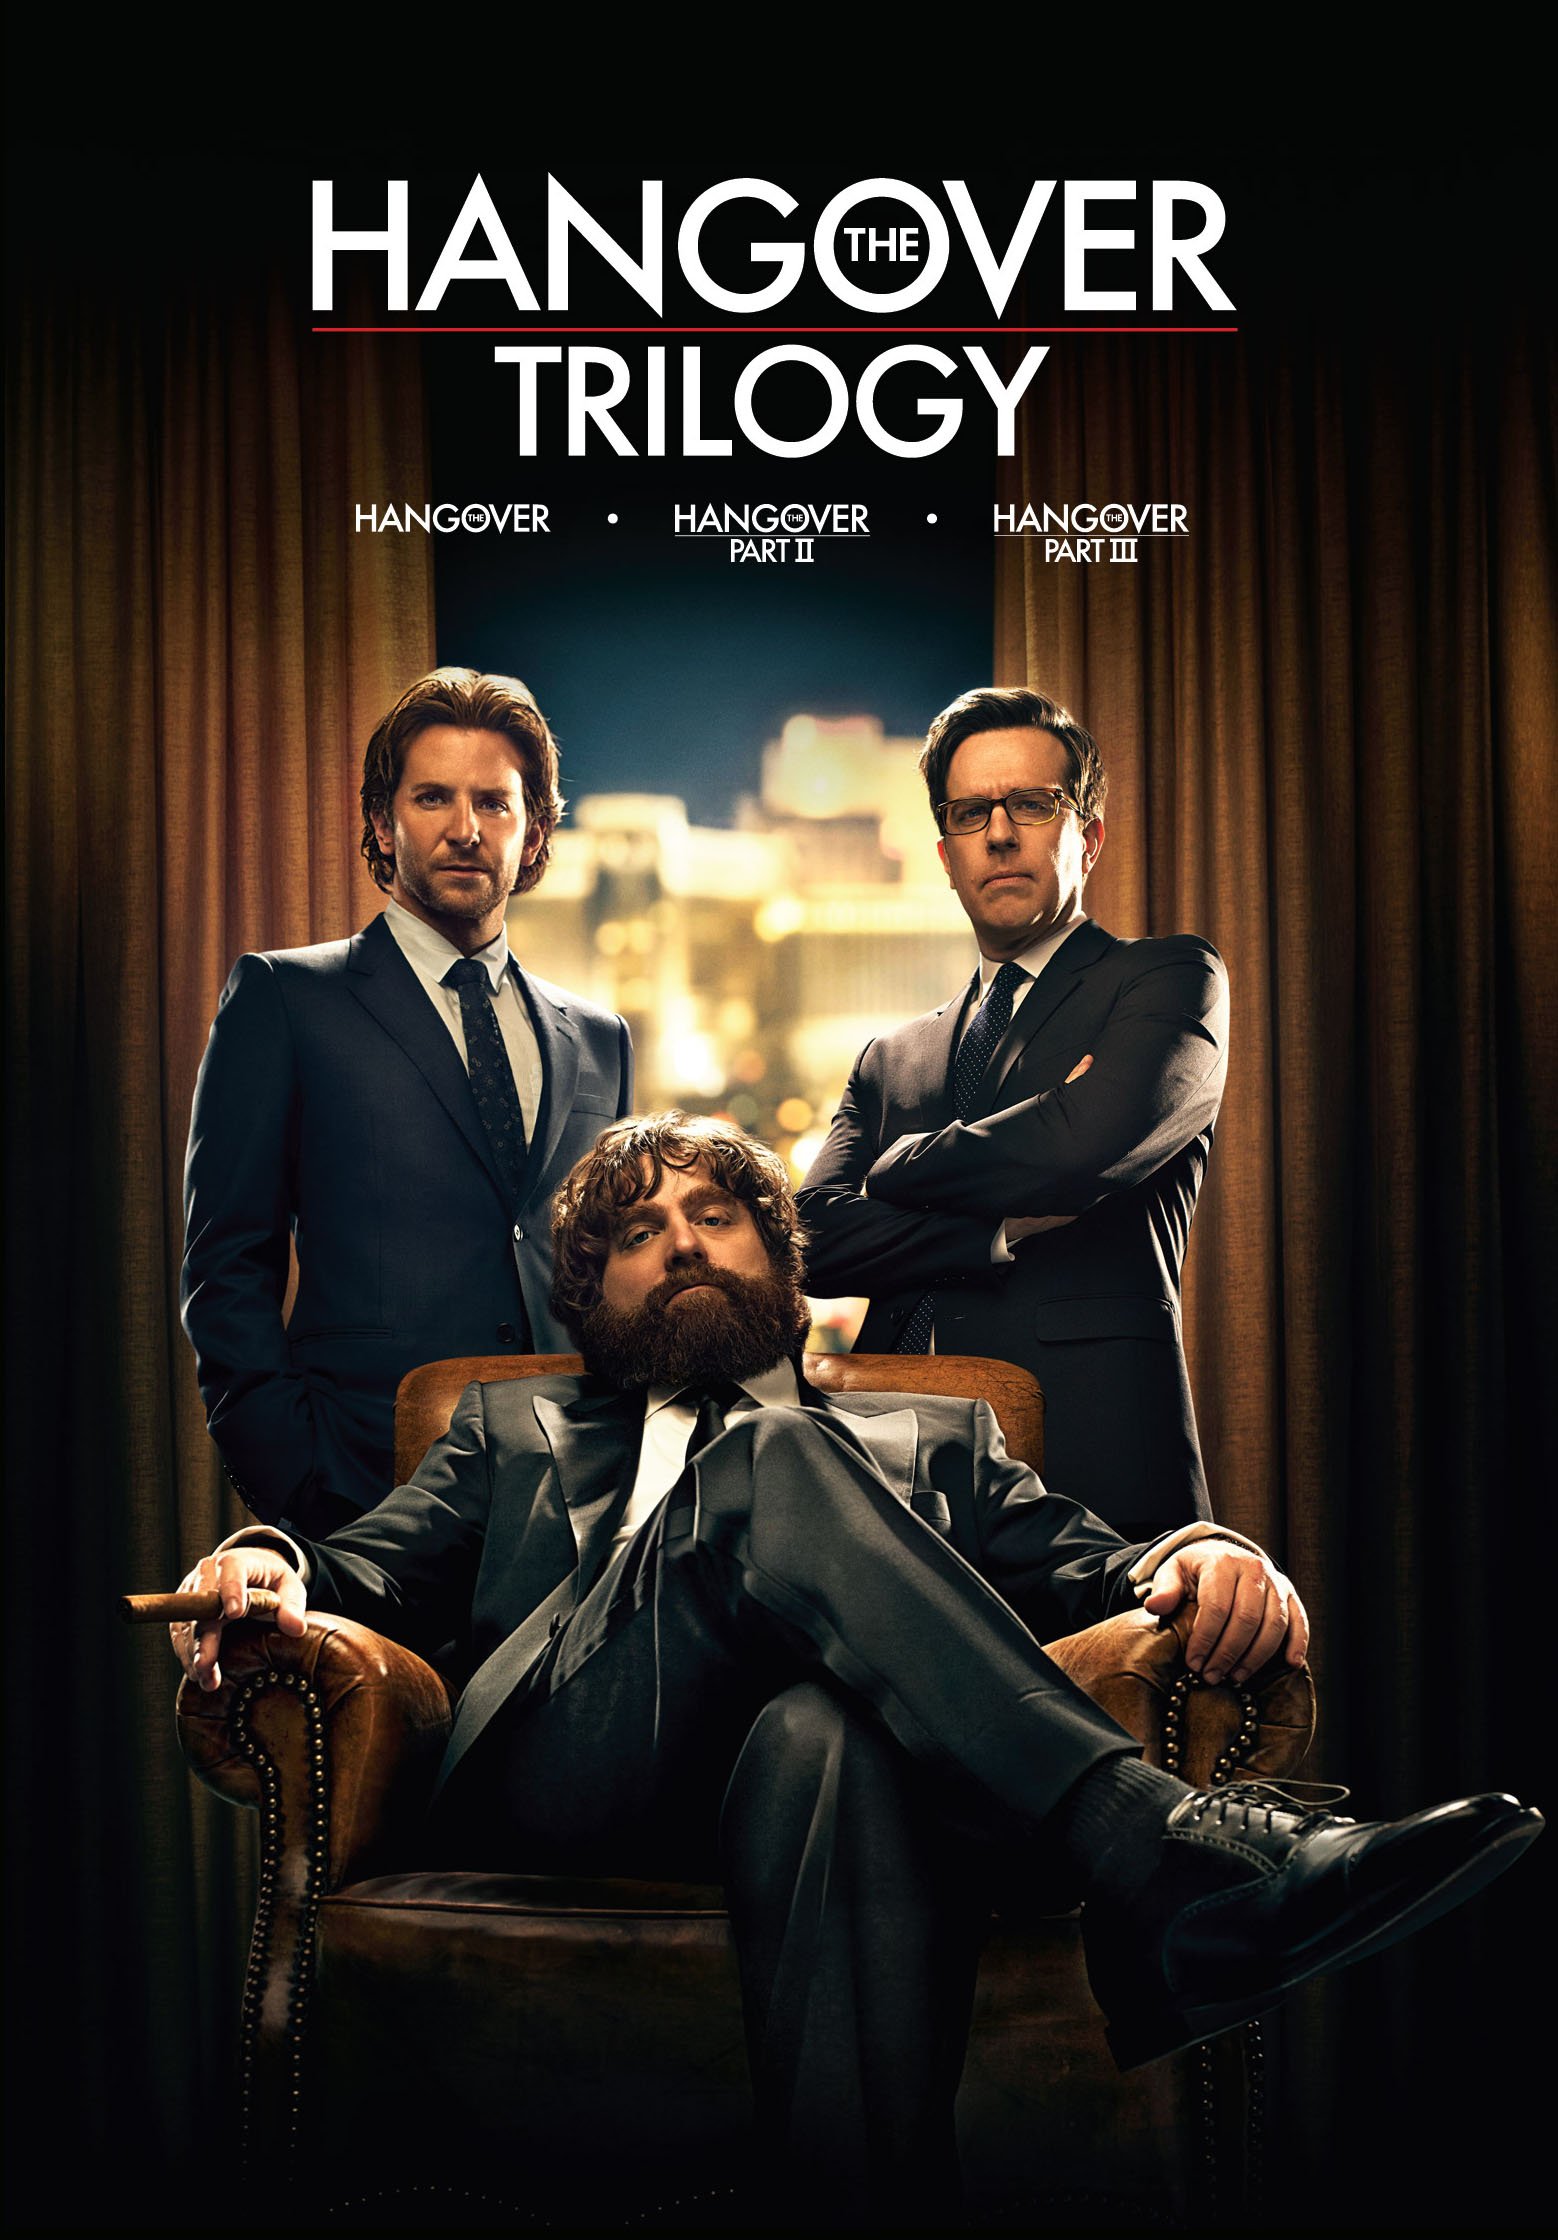 the-hangover-trilogy-movie-purchase-or-watch-online